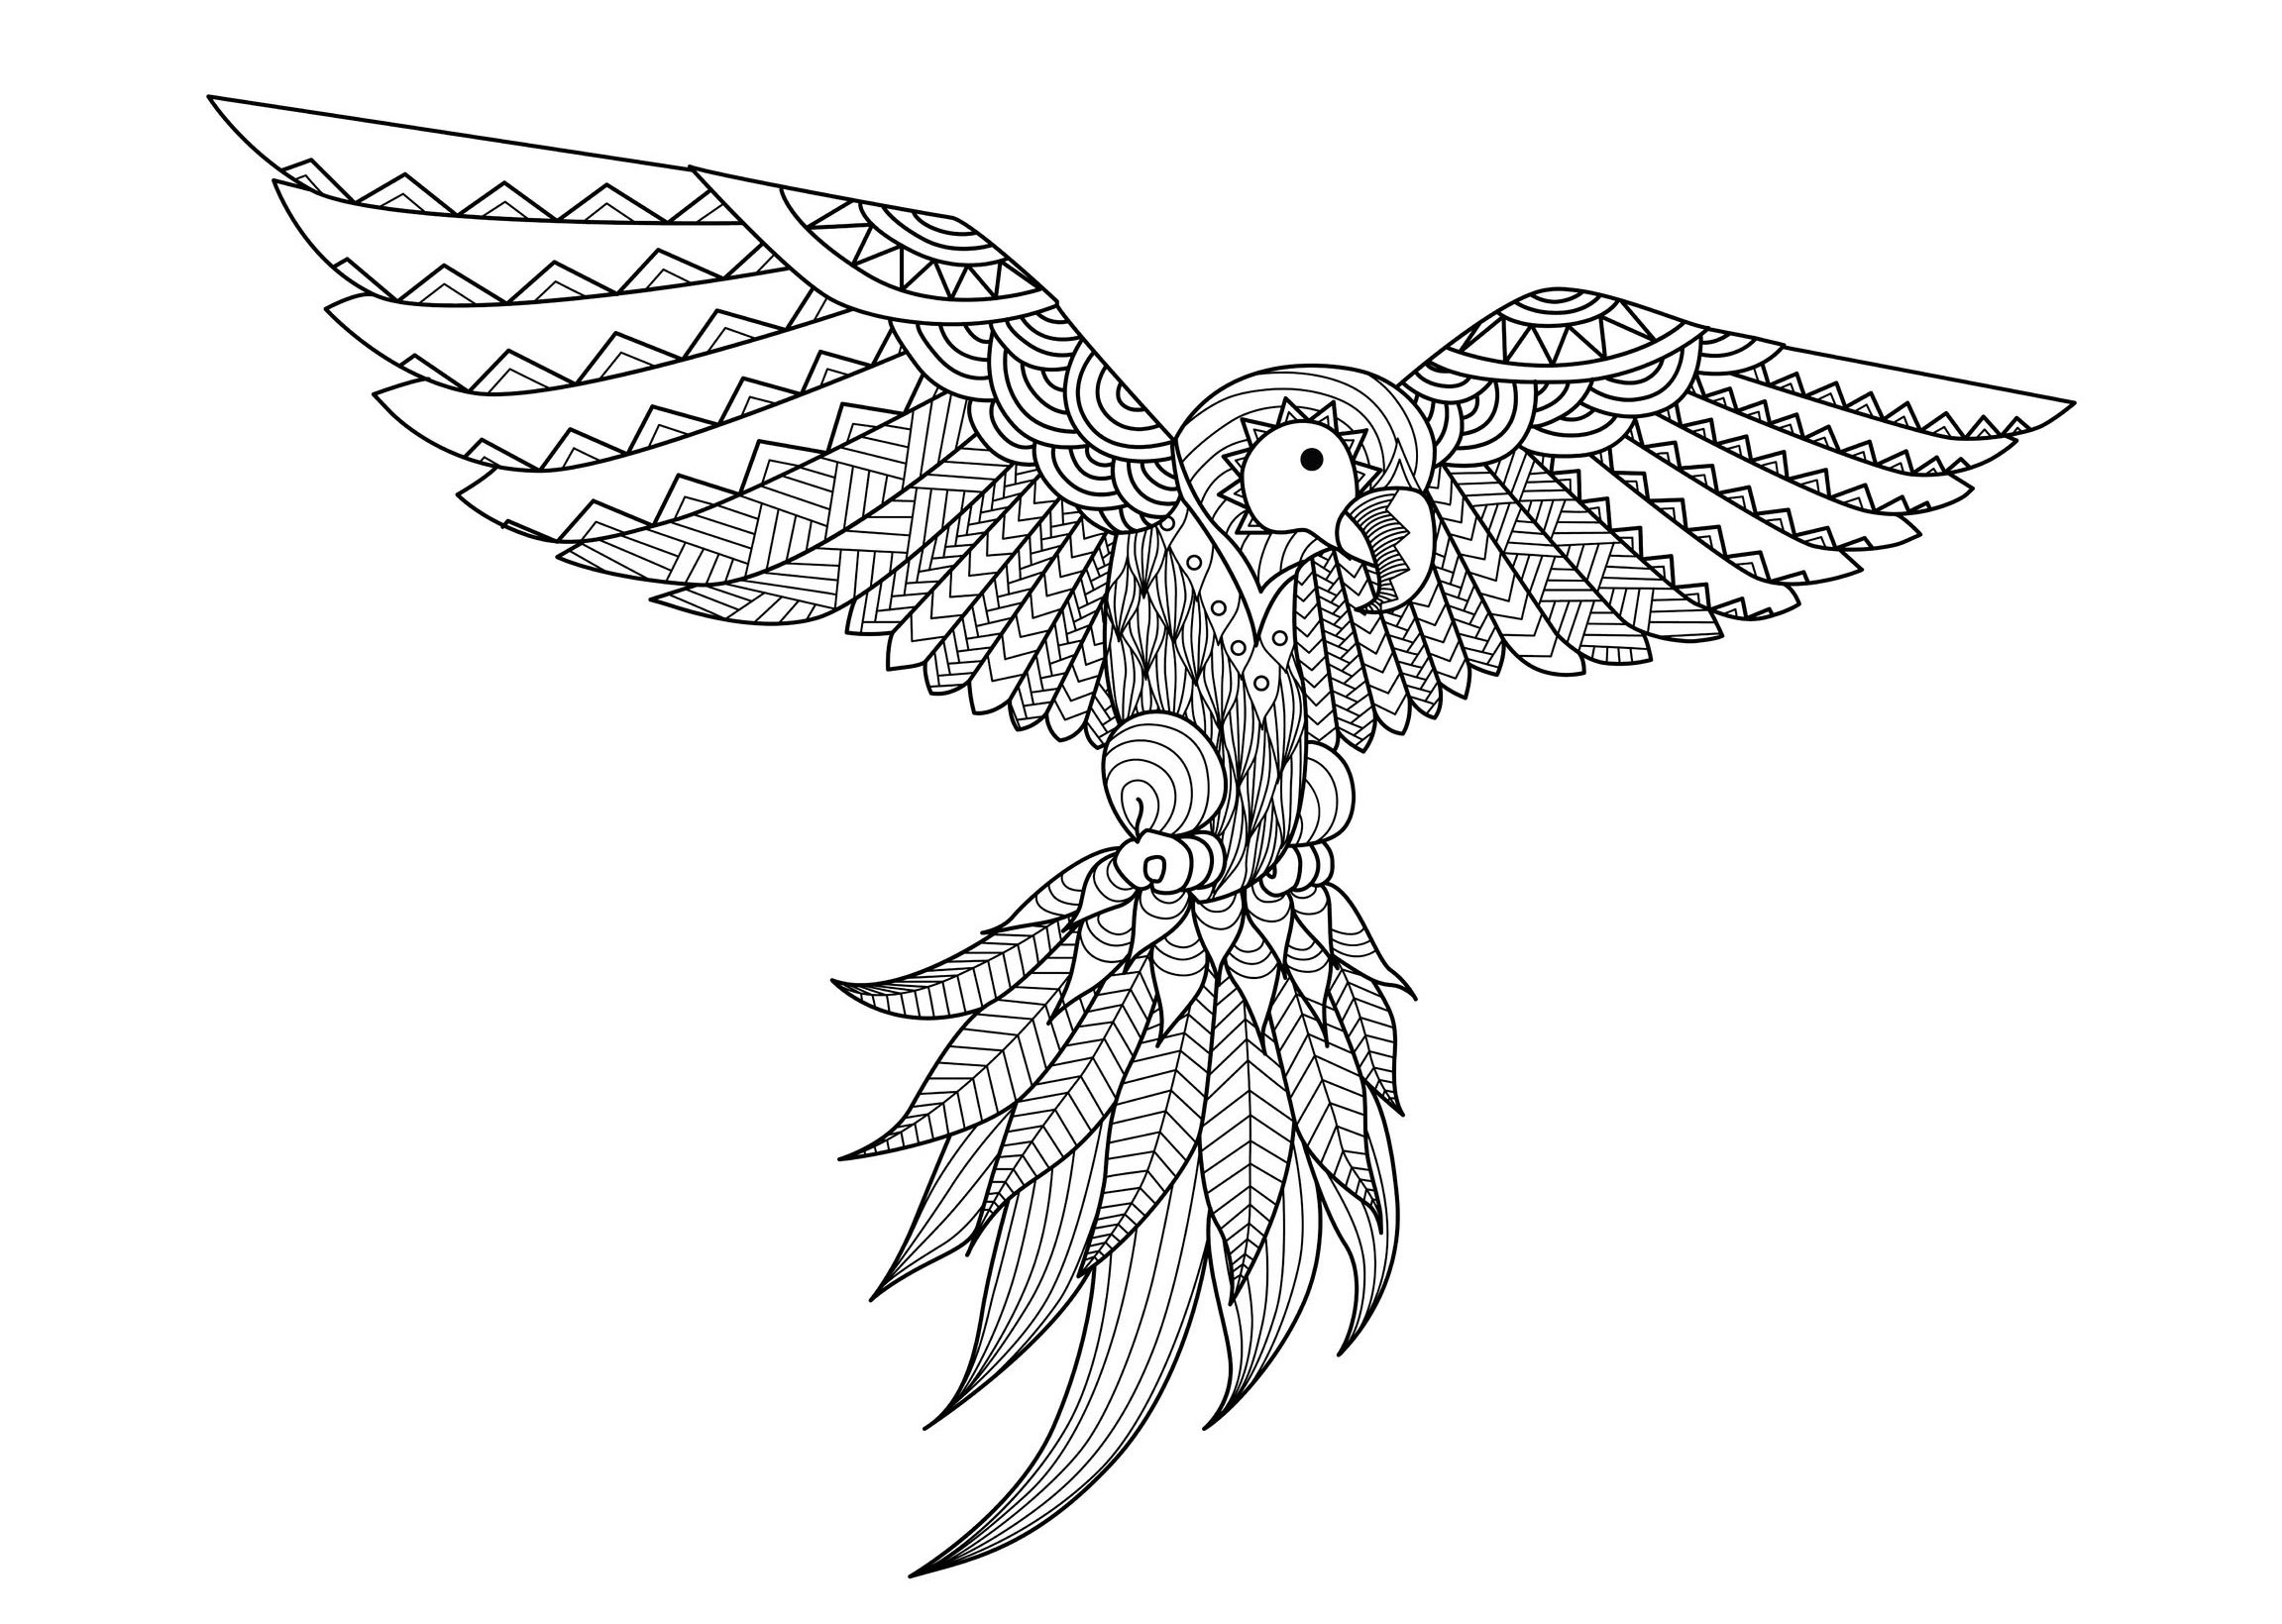 Superb drawing of parrot Zentangle, to color, by Bimdeedee (source: 123rf)